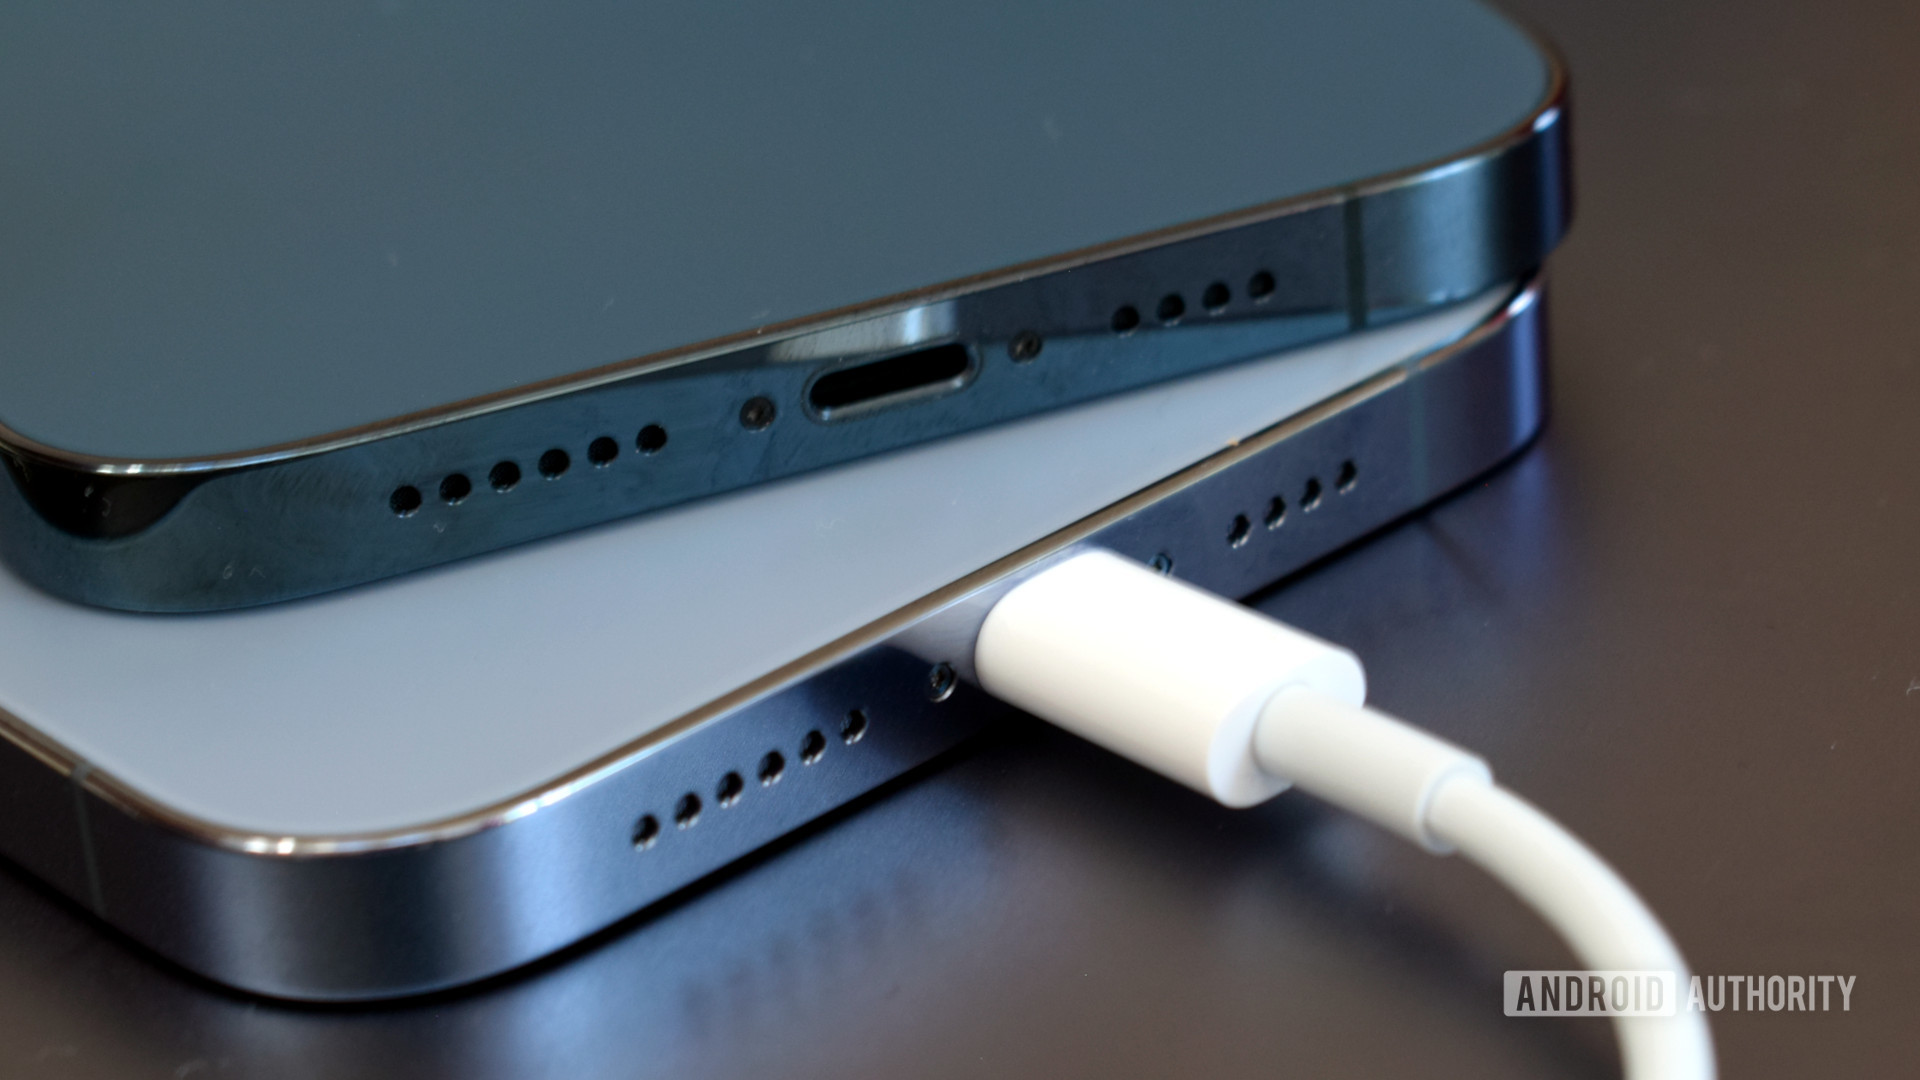 What does 'iPhone cable not supported' mean? Android